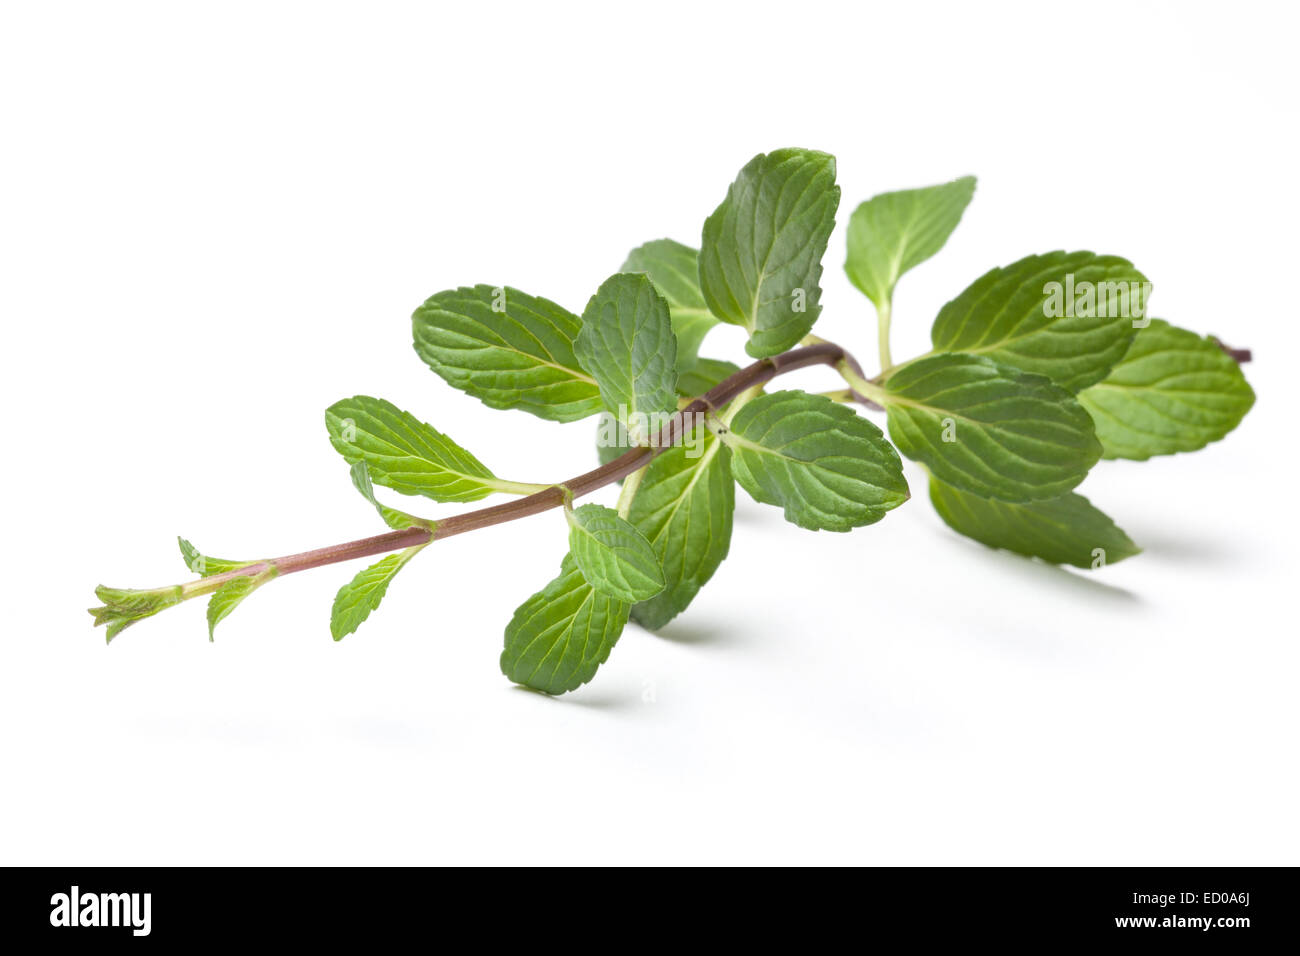 Picture of fresh mint stalk isolated on white. Stock Photo